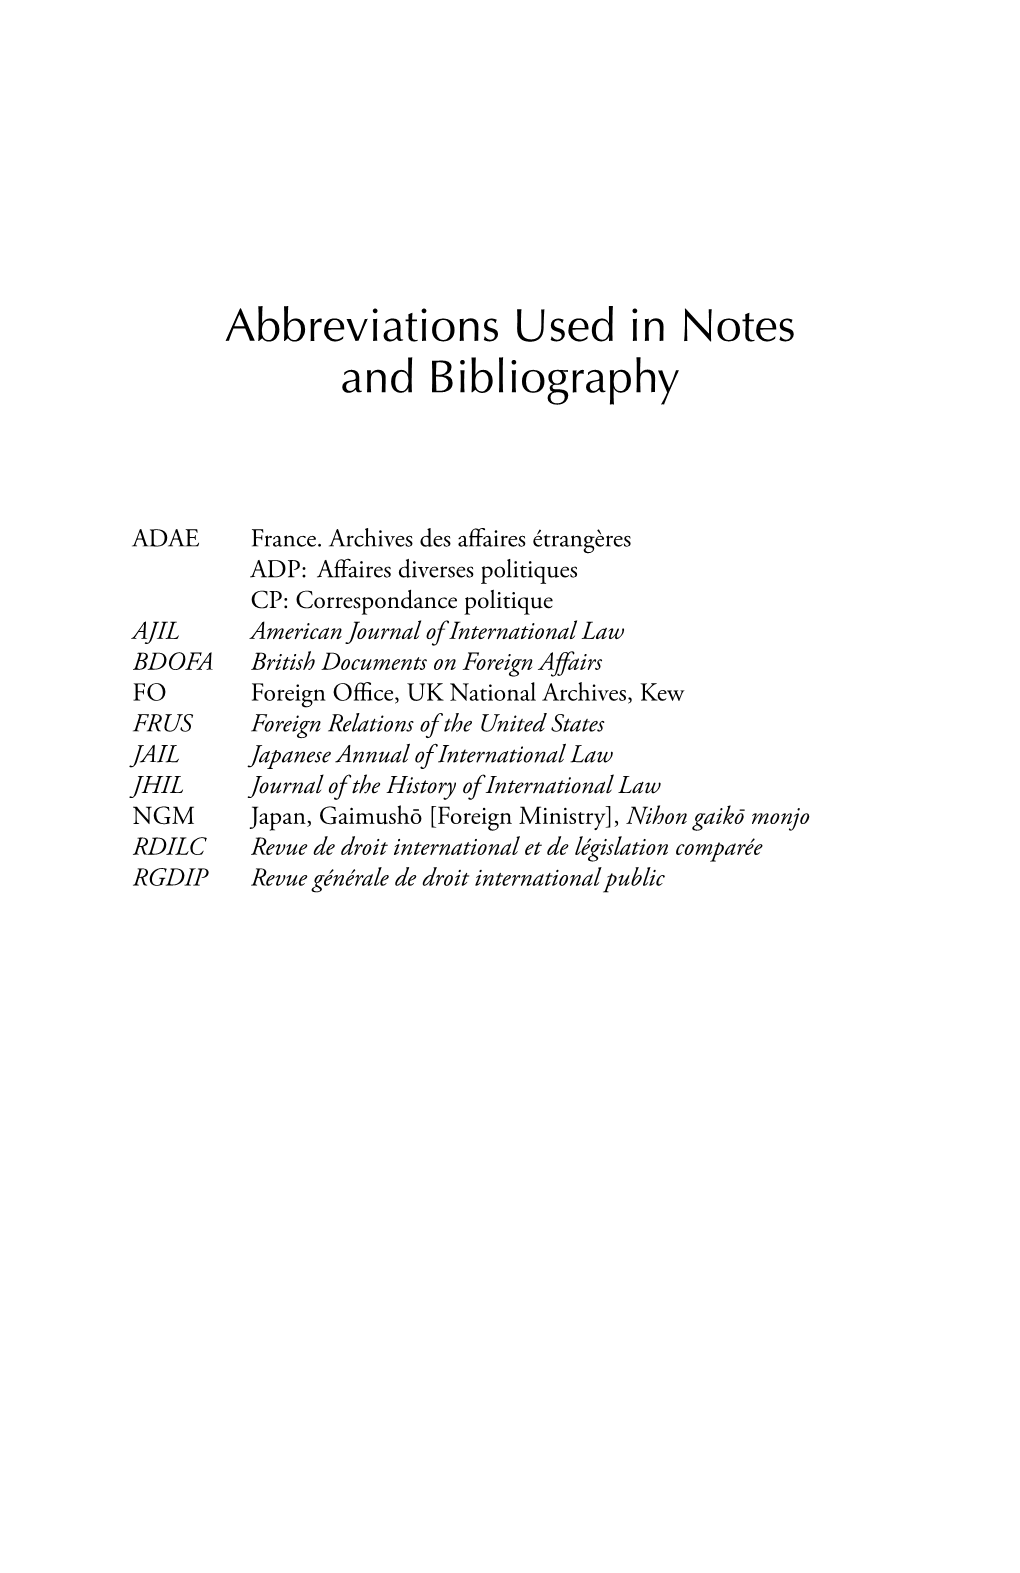 Abbreviations Used in Notes and Bibliography